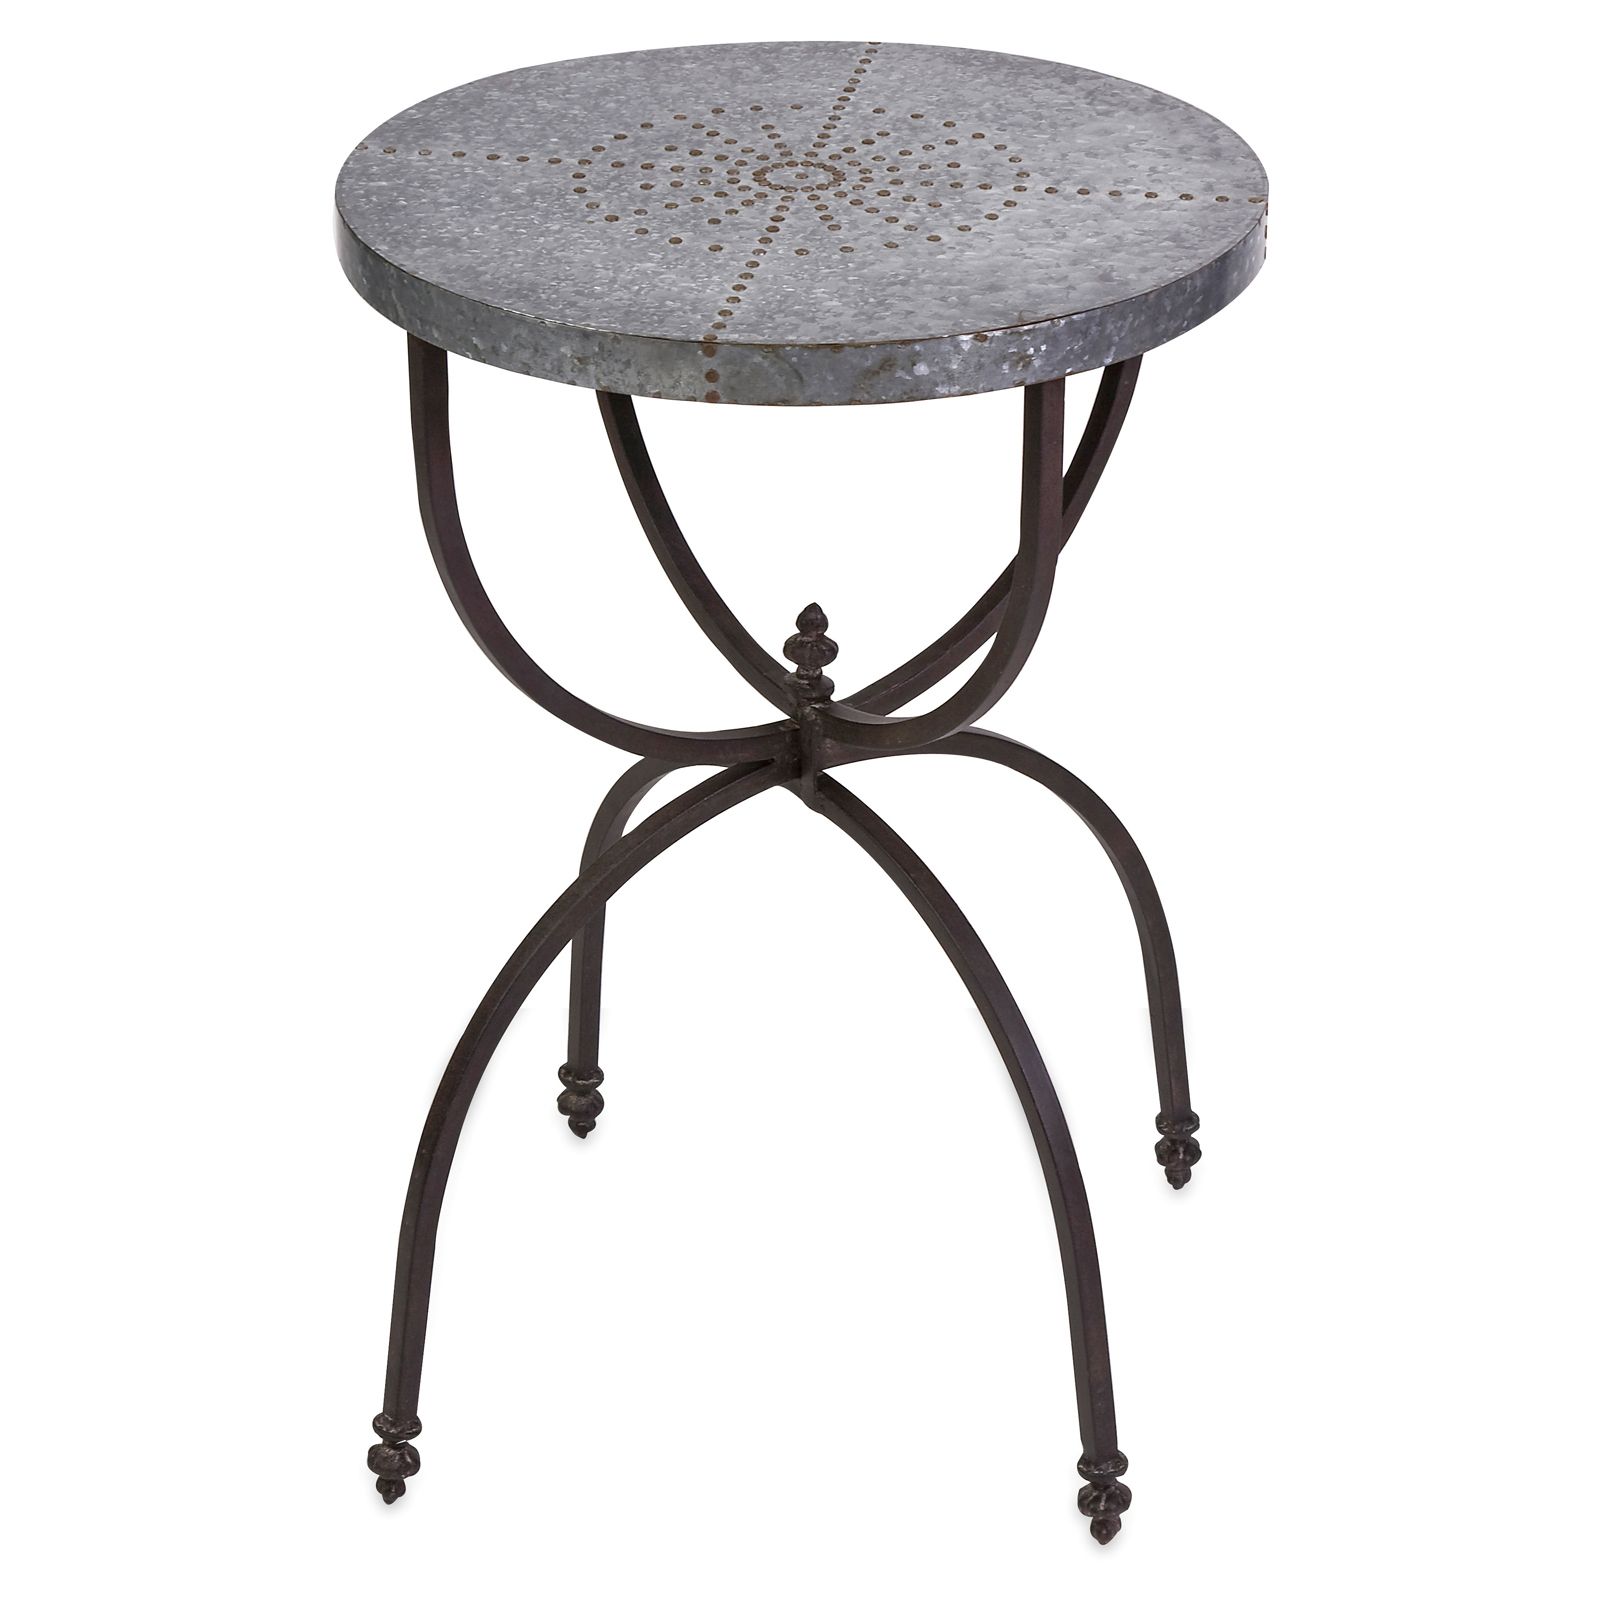 Gilbert Round Galvanized Accent Table At Hayneedle Throughout Wood And Steel Outdoor Side Tables (View 5 of 15)